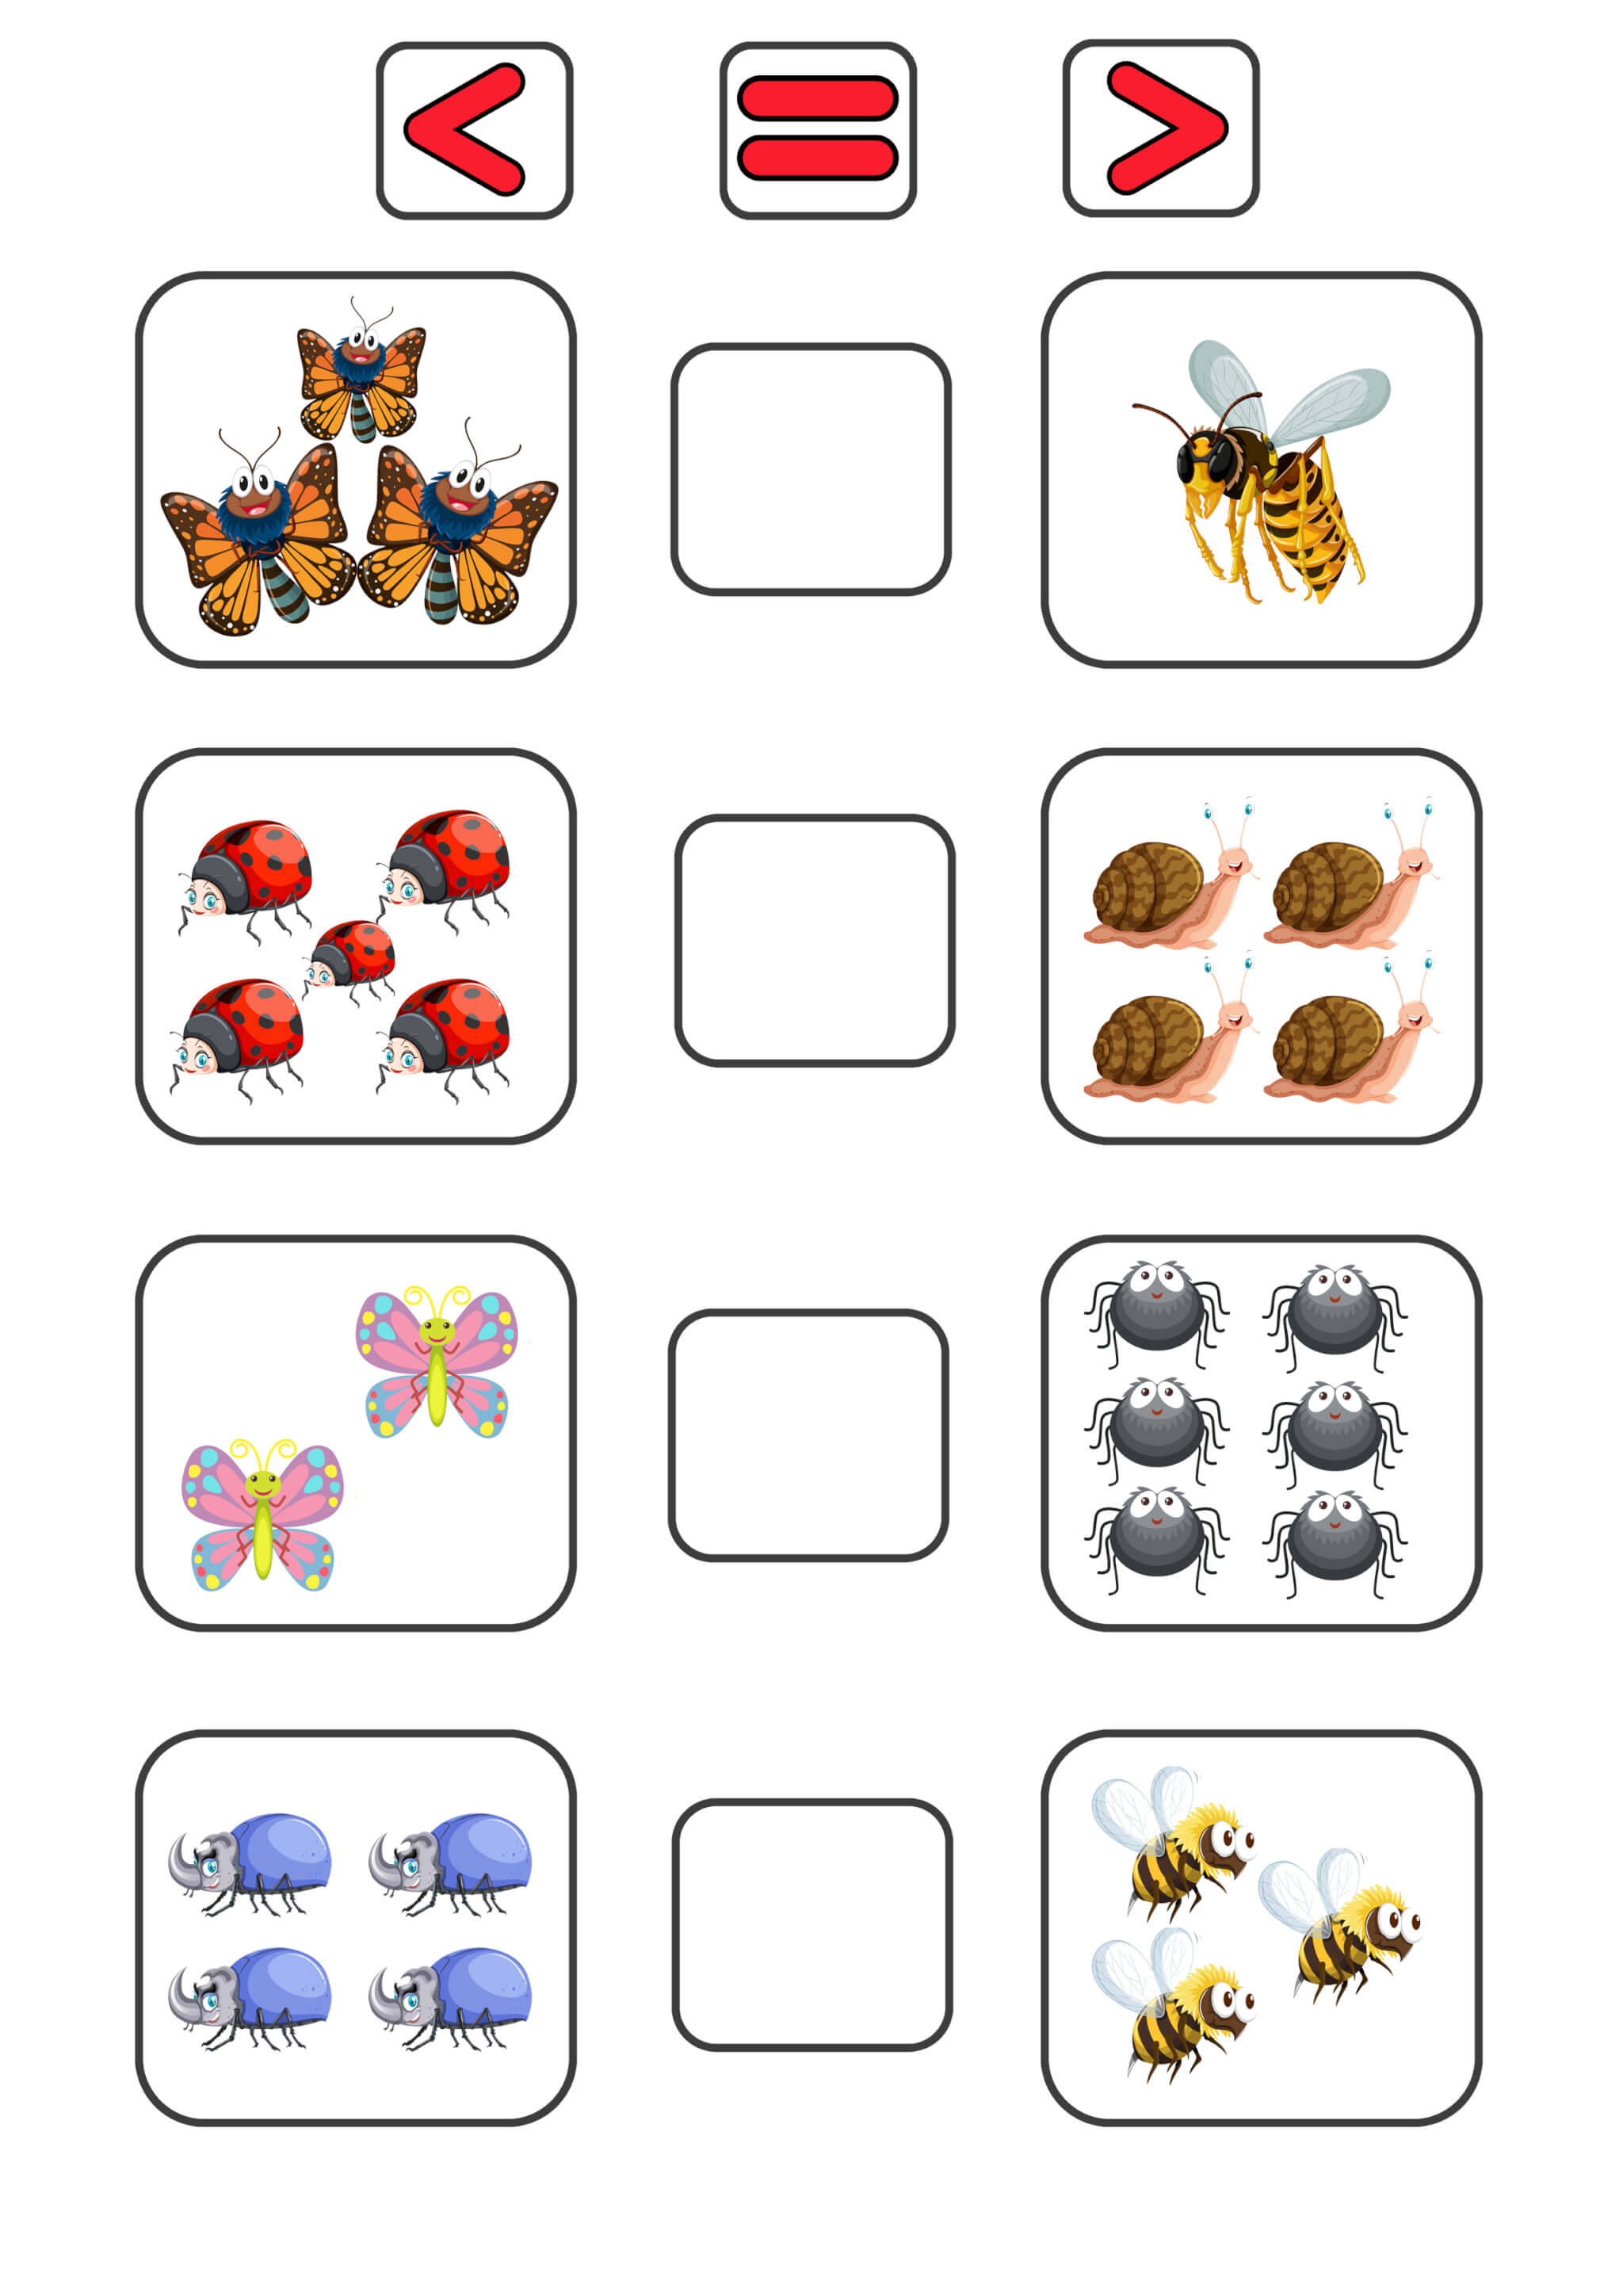 Worksheet Comparing Numbers Insects - Image 2